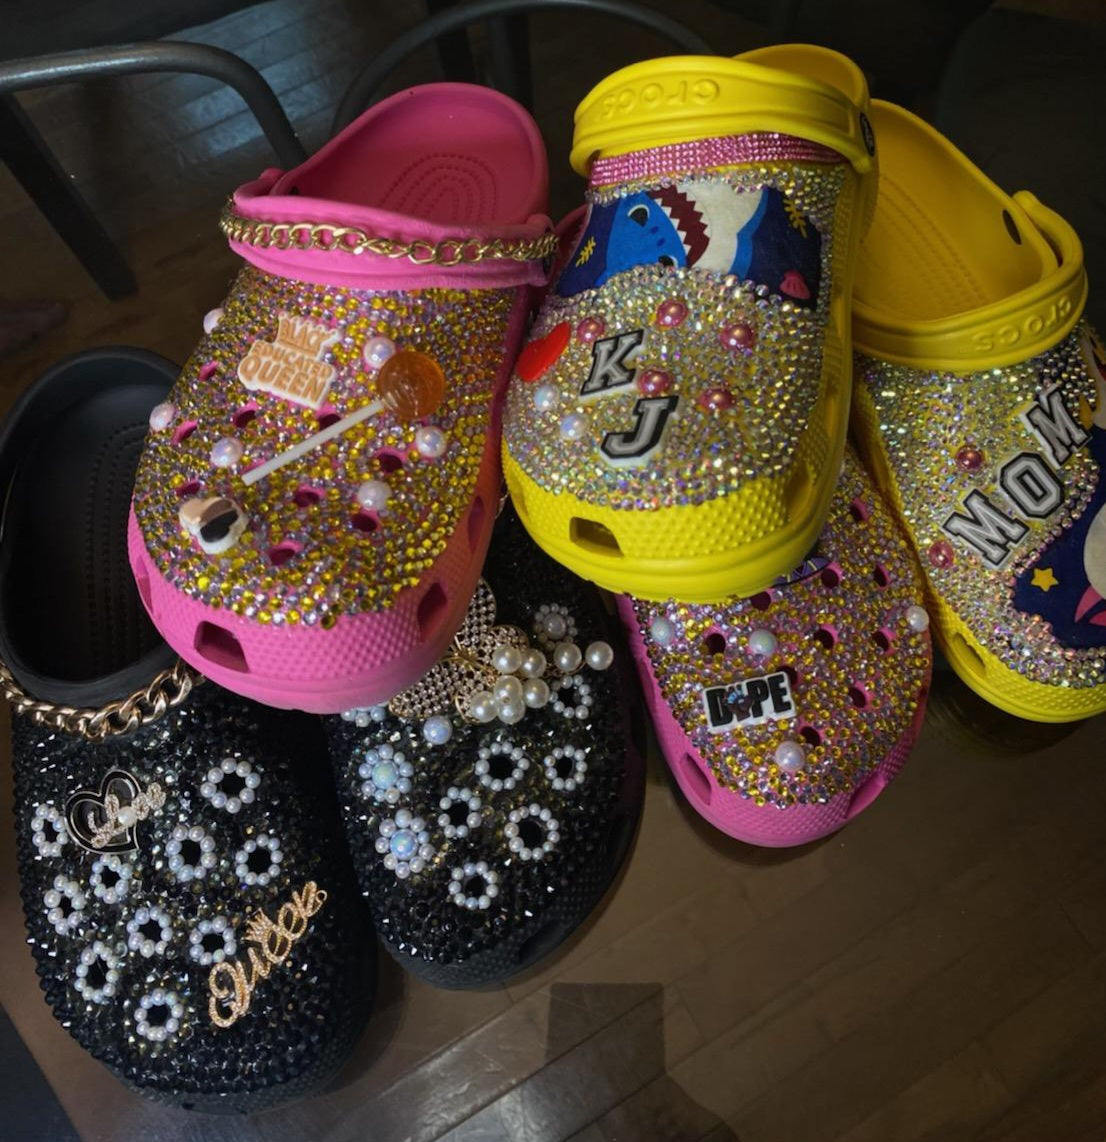 Hartford mom brings bling, style to the comfort of Crocs